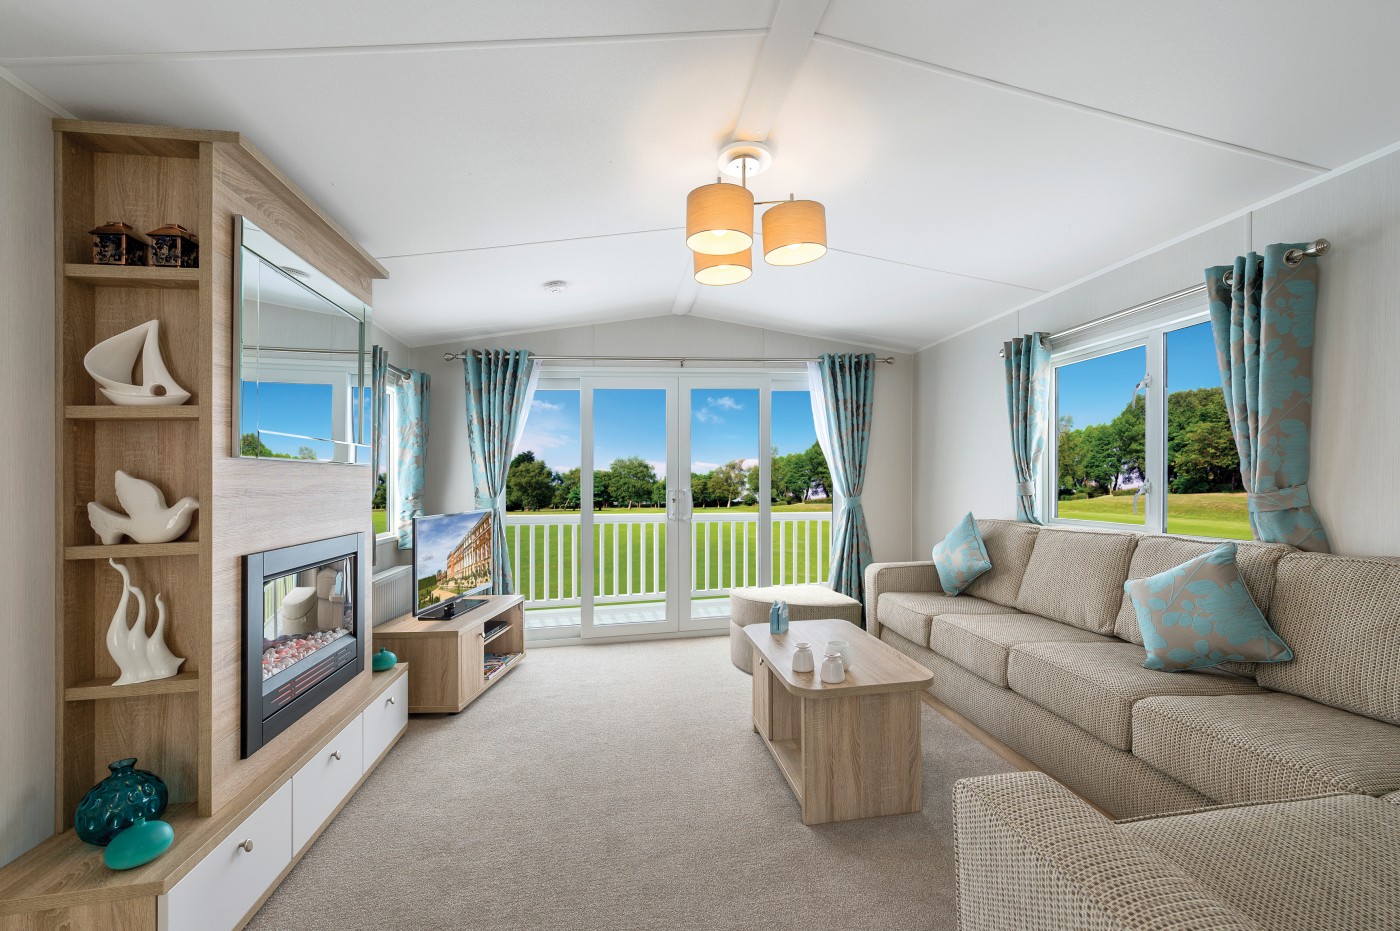 The 2015 Willerby Avonmore is close to the River Tummel and is south facing. 
Pet Friendly
Sleeps 6 in three bedrooms
Open plan kitchen/living room layout